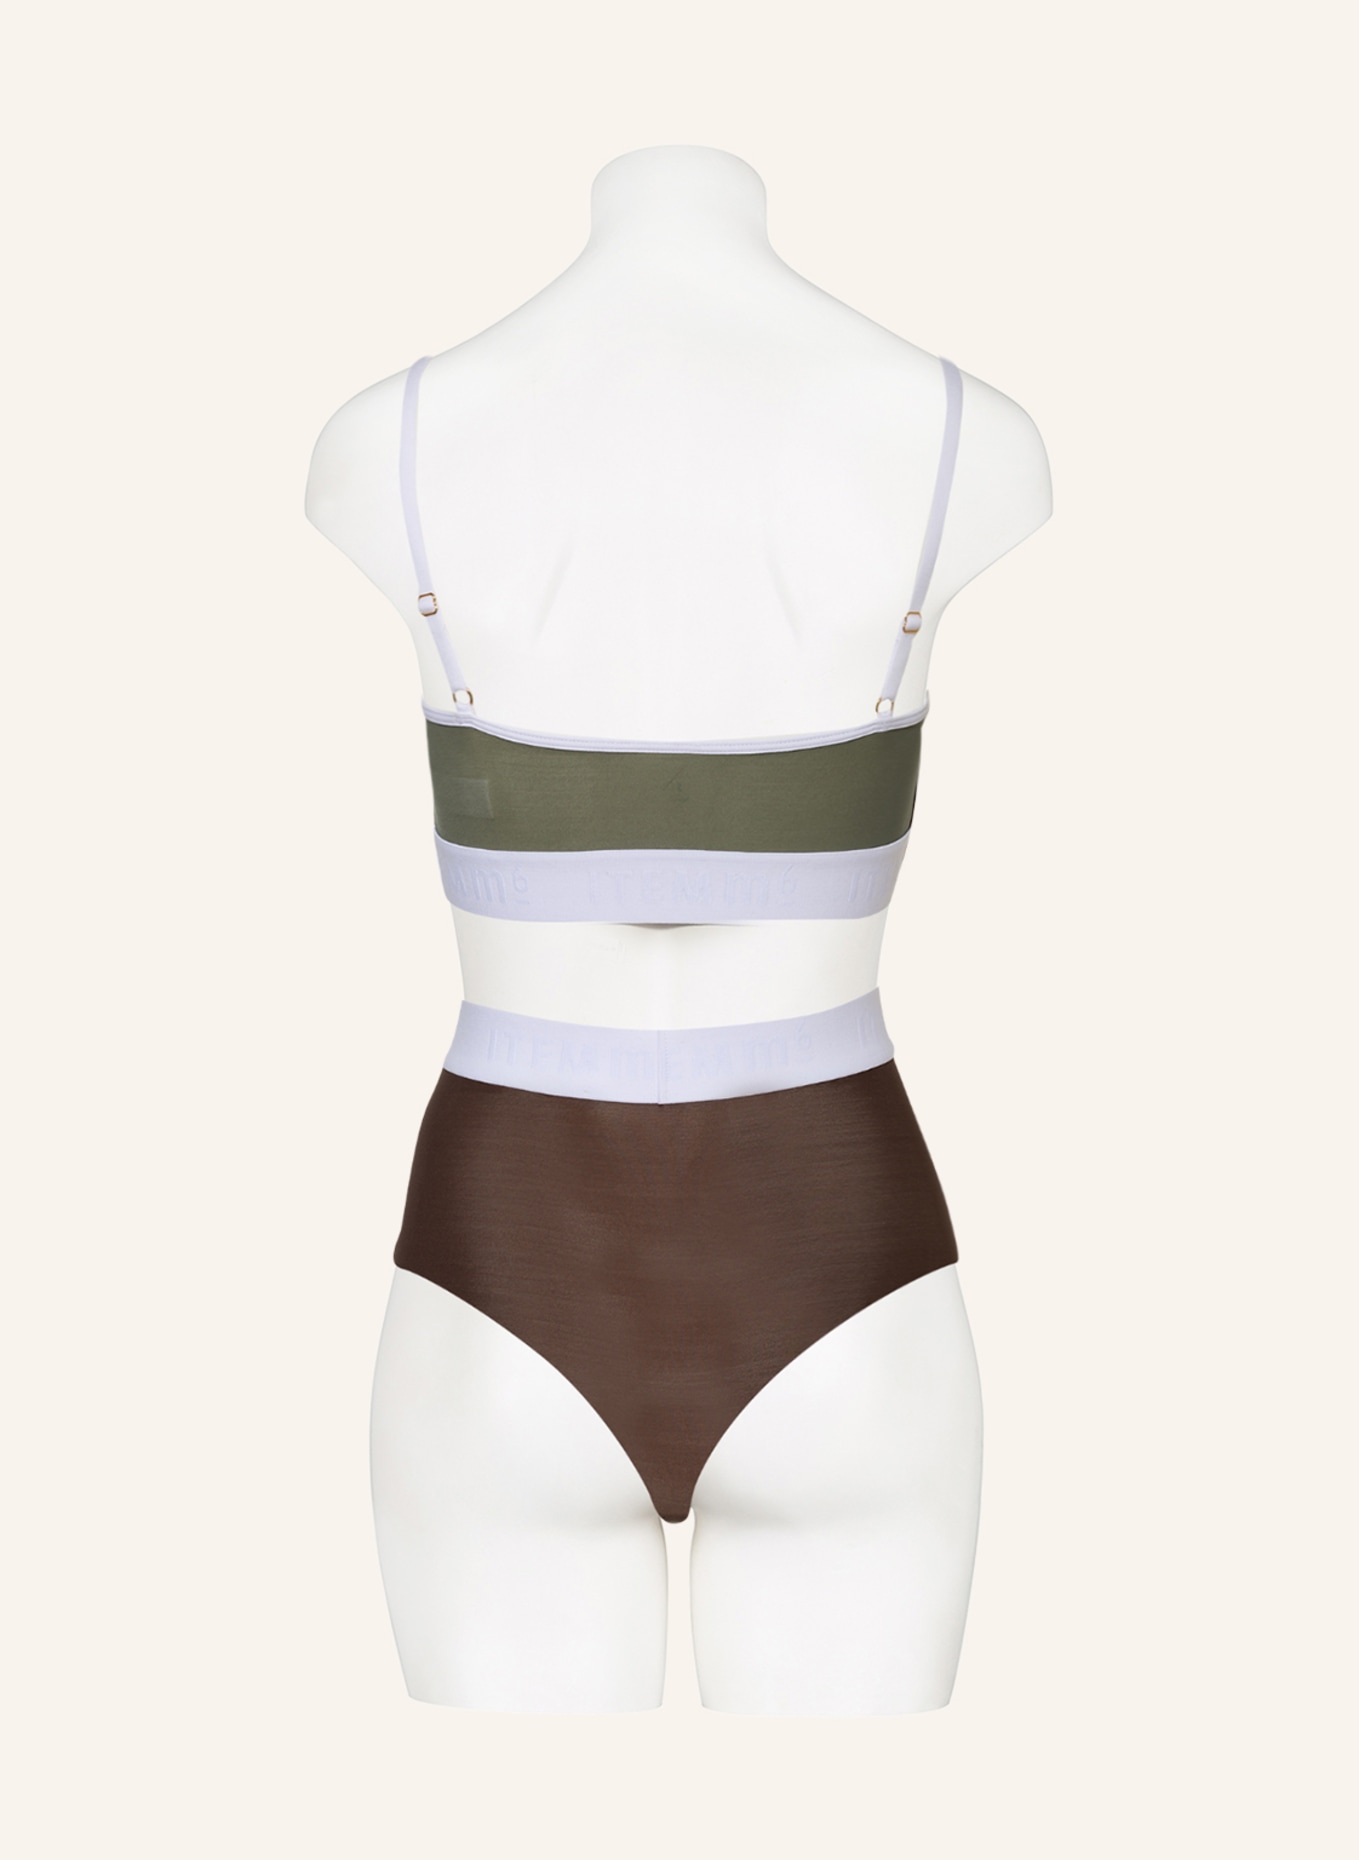 ITEM m6 Shaping briefs ALL MESH, Color: OLIVE/ BROWN/ WHITE (Image 3)